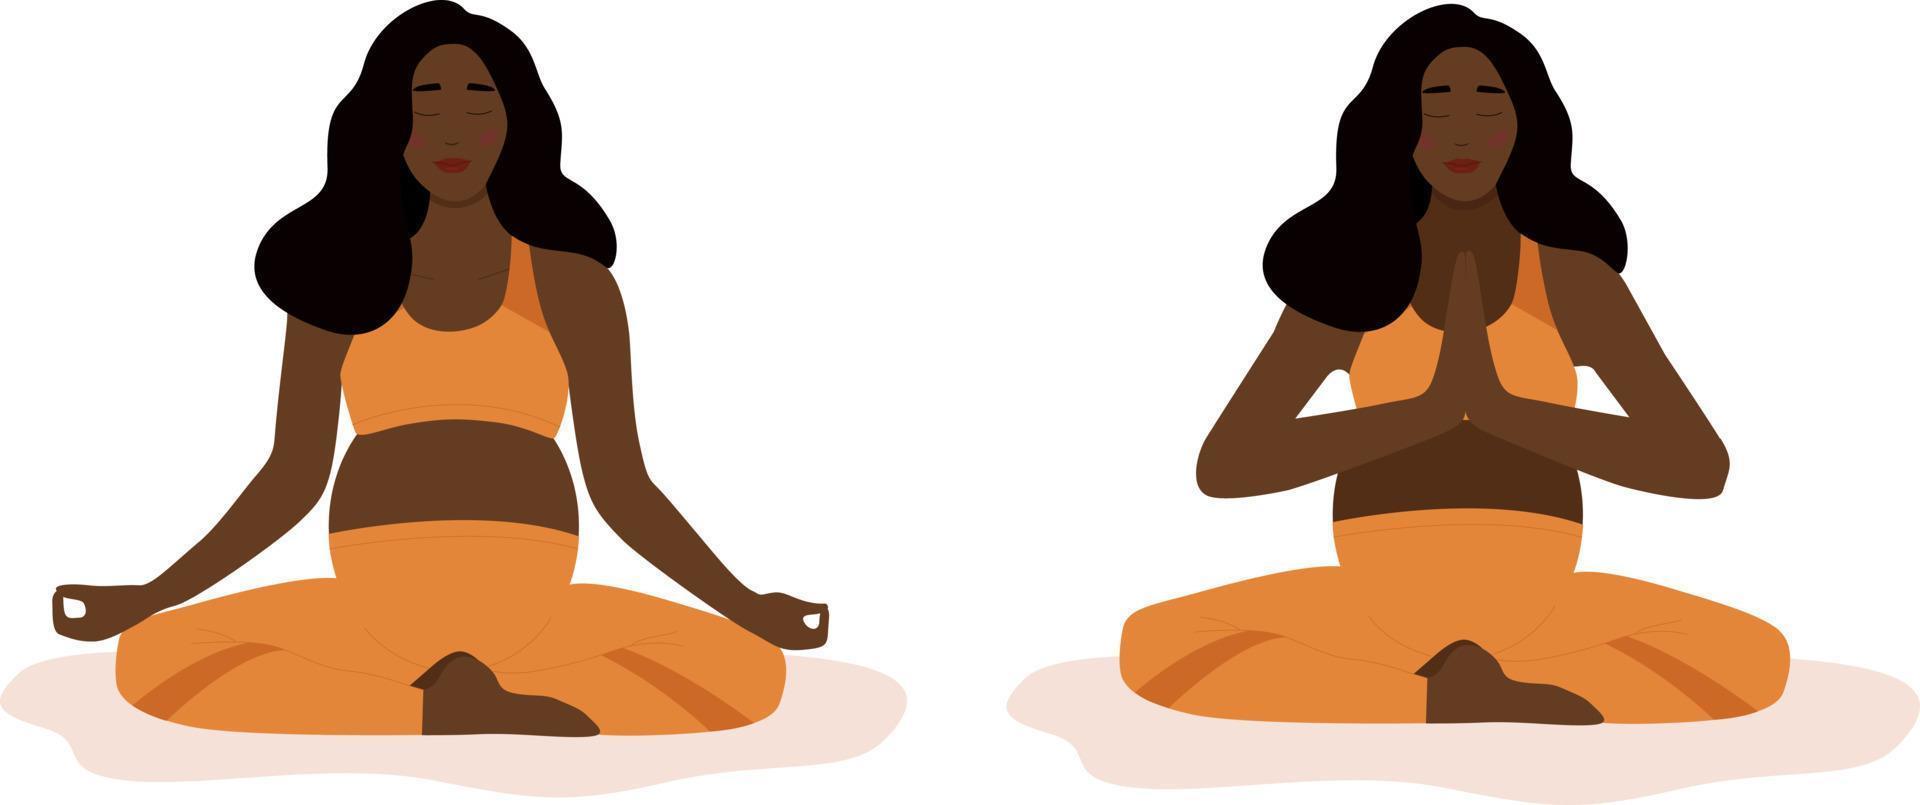 A pregnant African American woman meditates in the lotus position and practices yoga. The concept of yoga, meditation, relaxation, health, pregnancy, motherhood. Breathing exercises and health care. vector